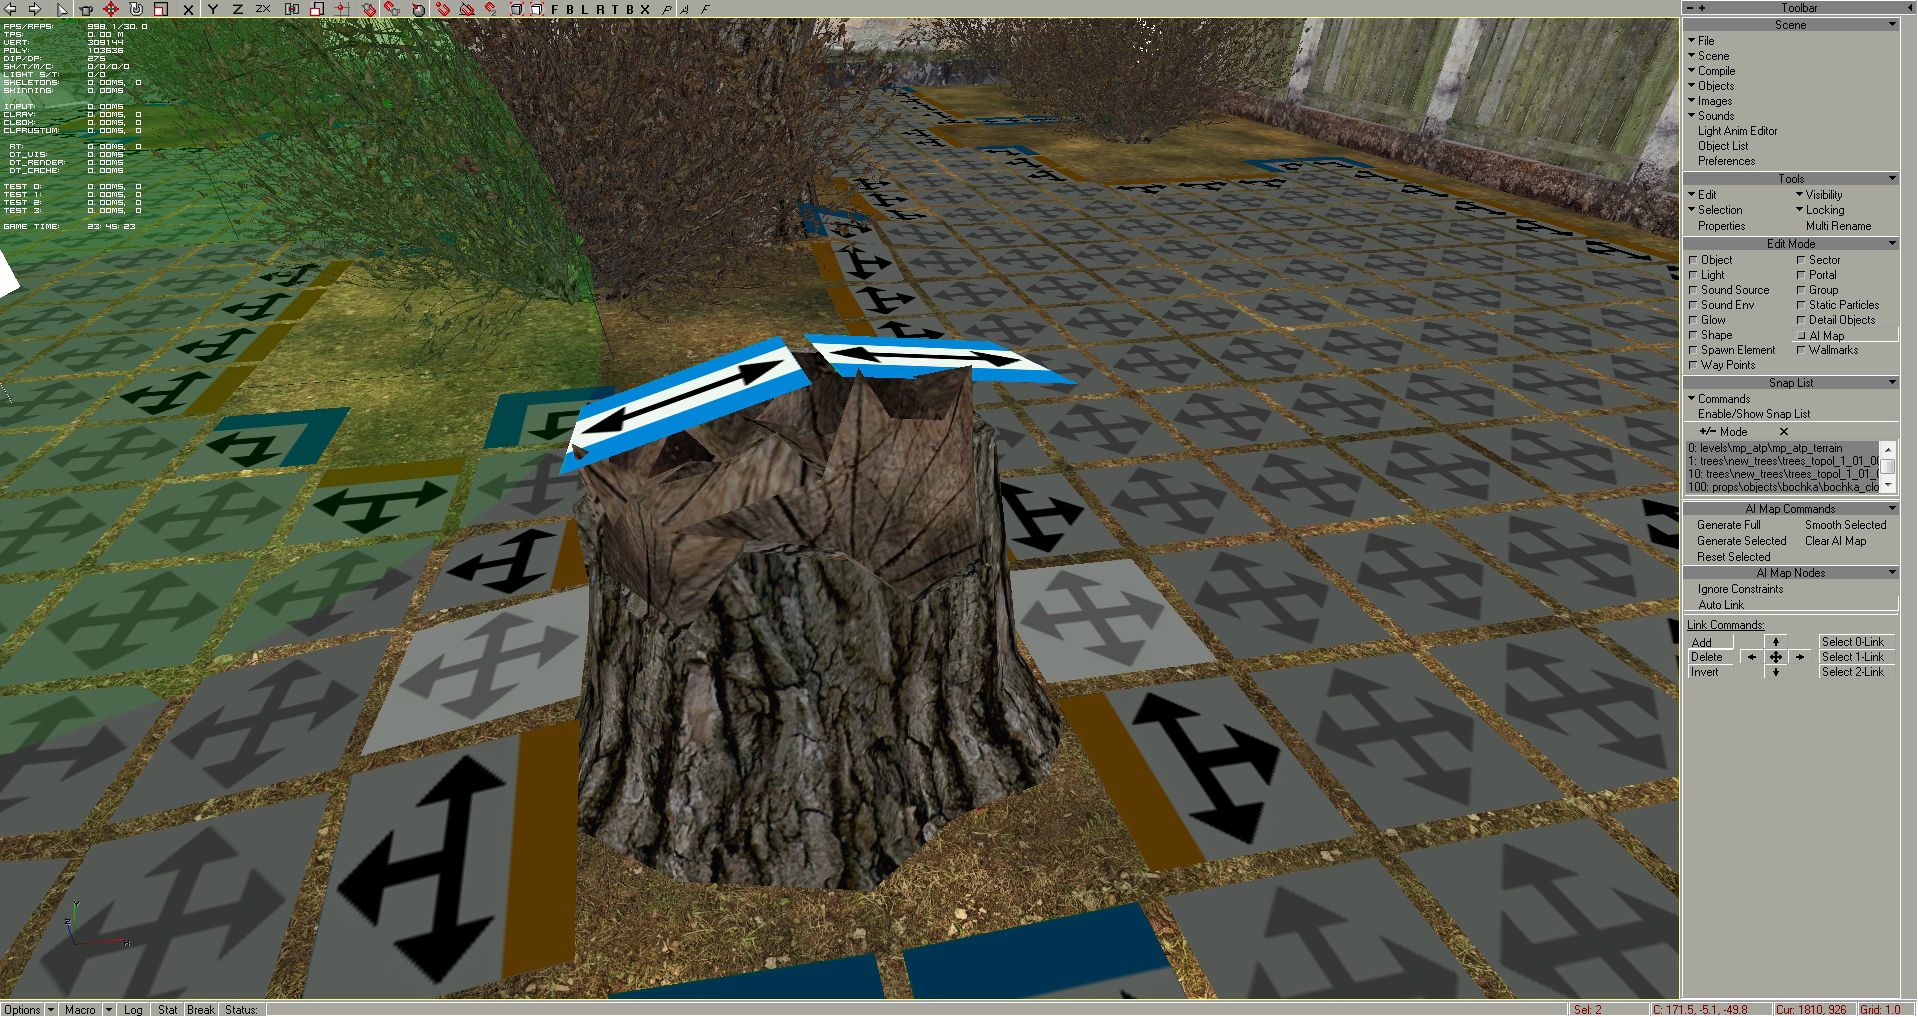 These 2 ai nodes are useless, it would be weird to see npcs/creatures walking on top of the trunk